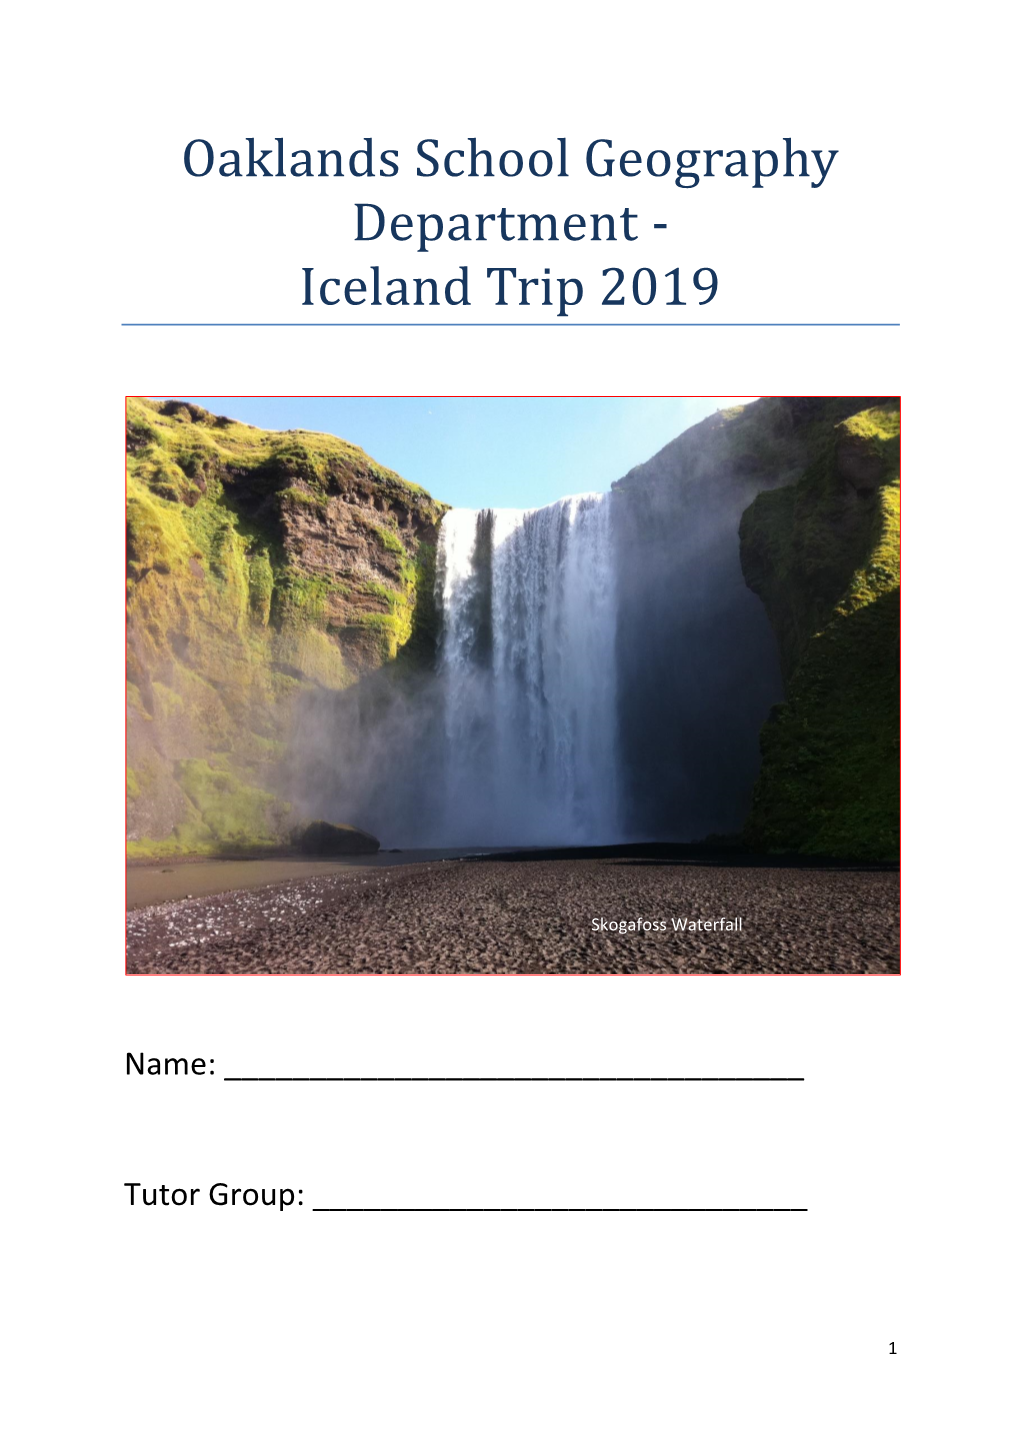 Oaklands School Geography Department - Iceland Trip 2019